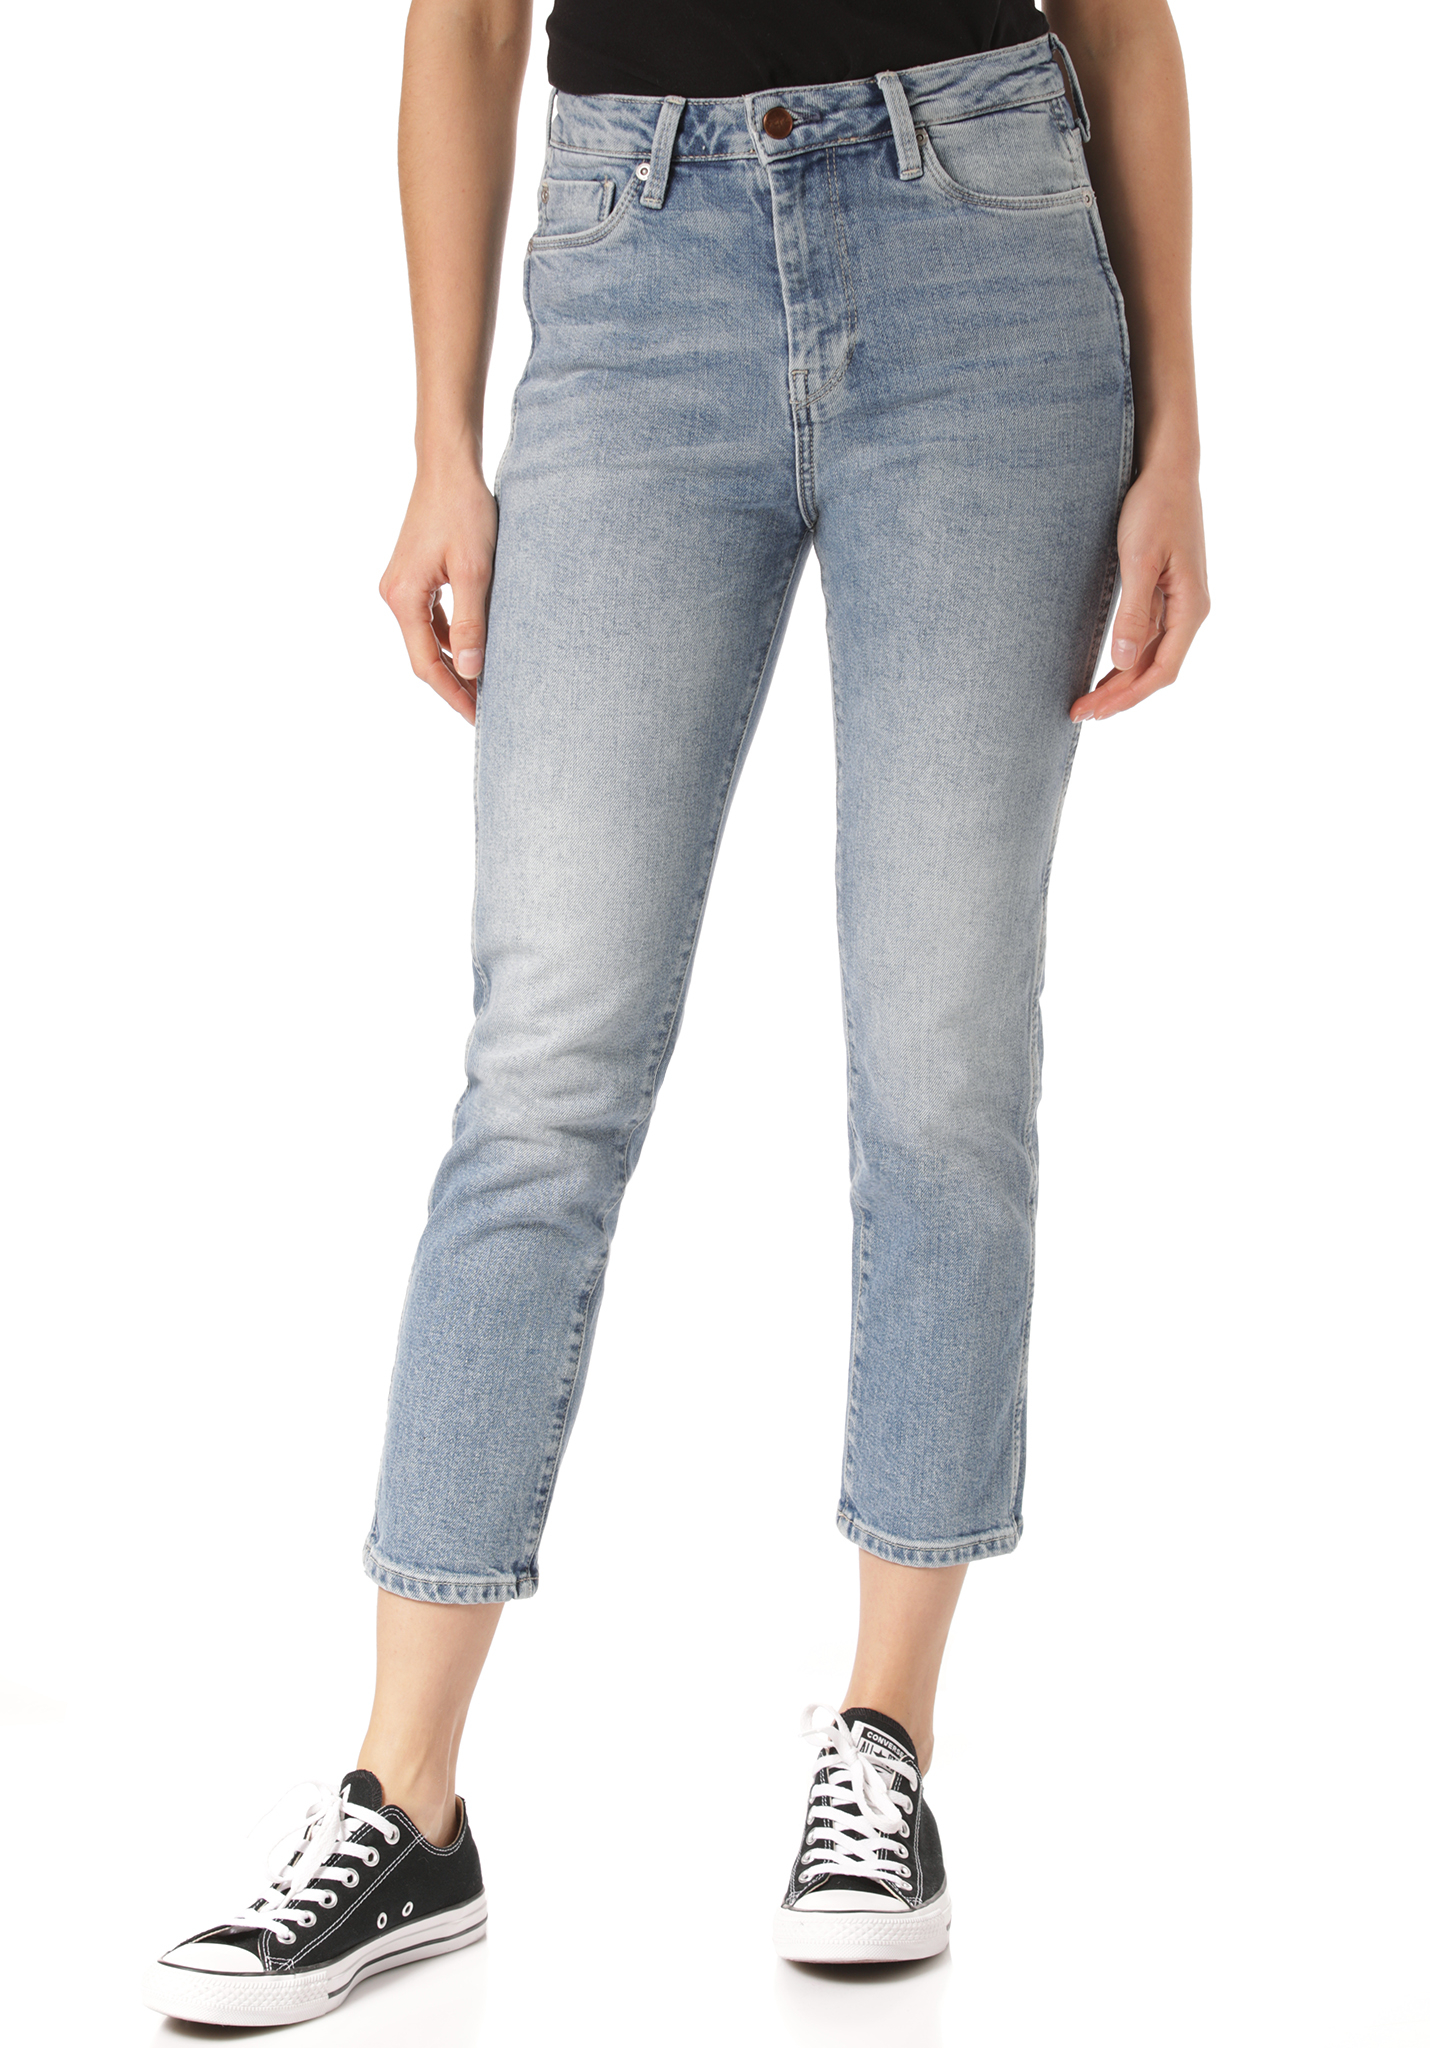 Pepe Jeans Dion 7/8 Skinny Jeans jeans 32/XX